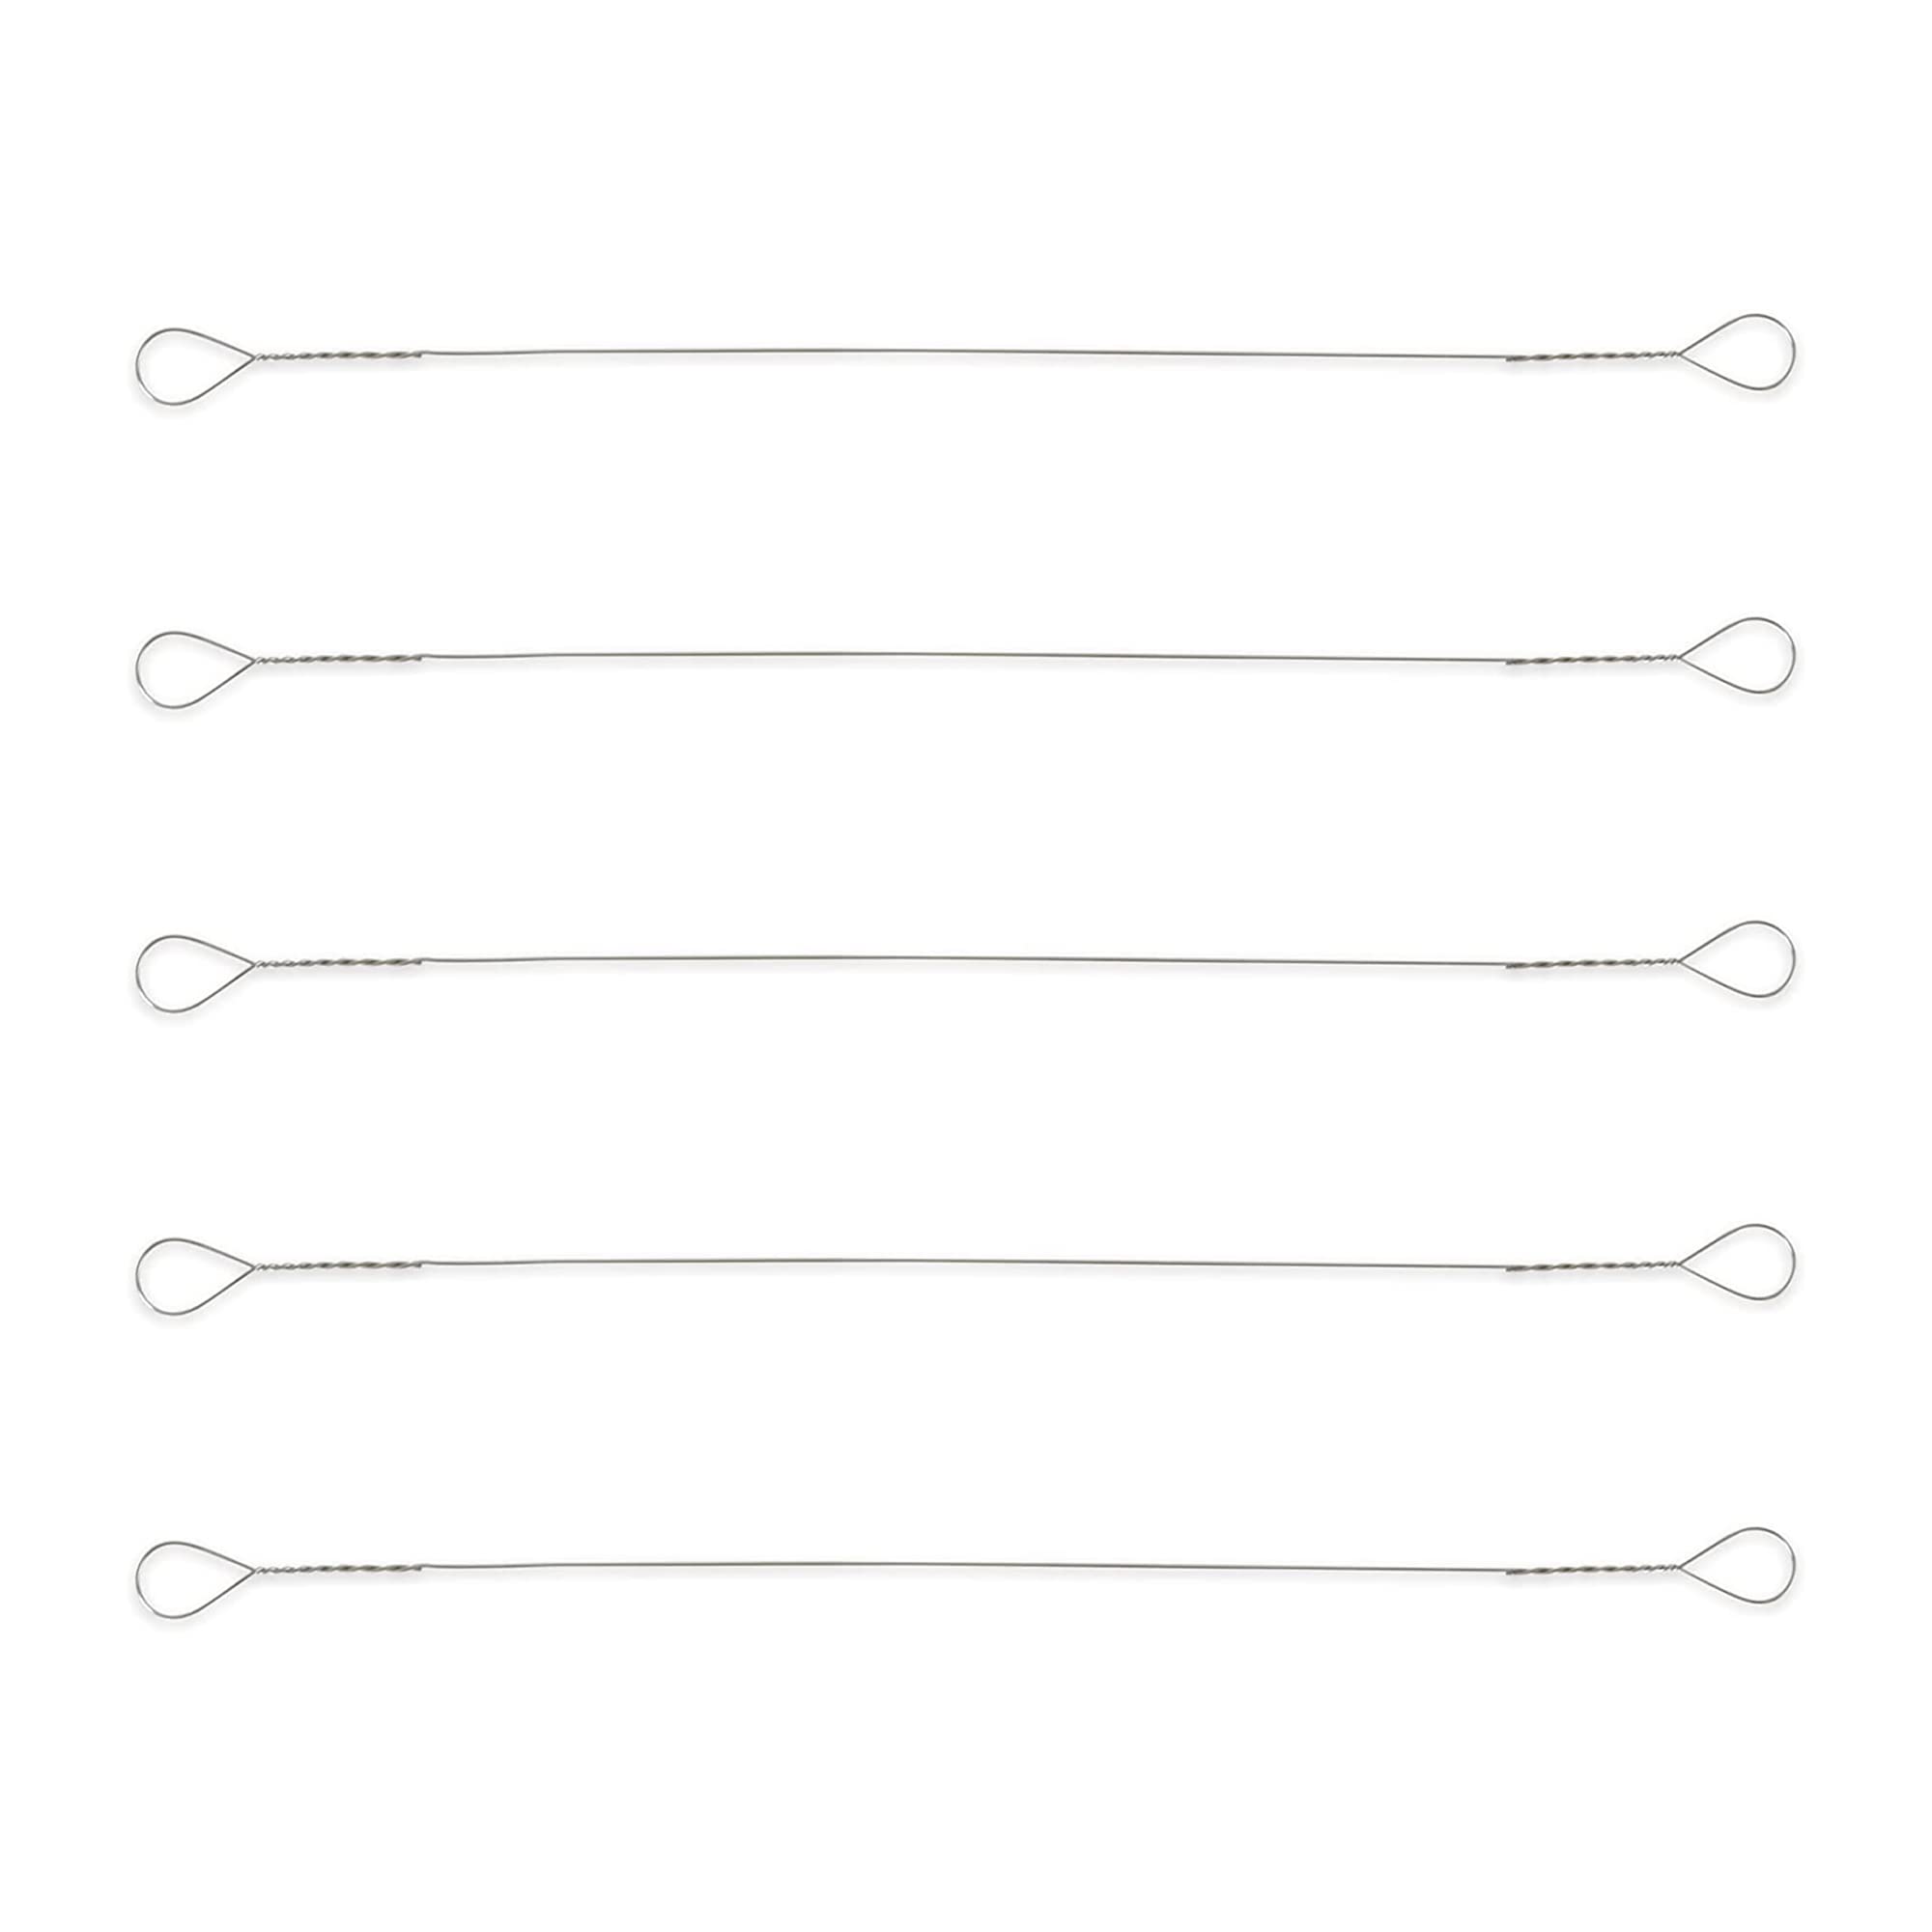 Fox Run Cheese Wires Set of 5,Silver, 5.5 inches long